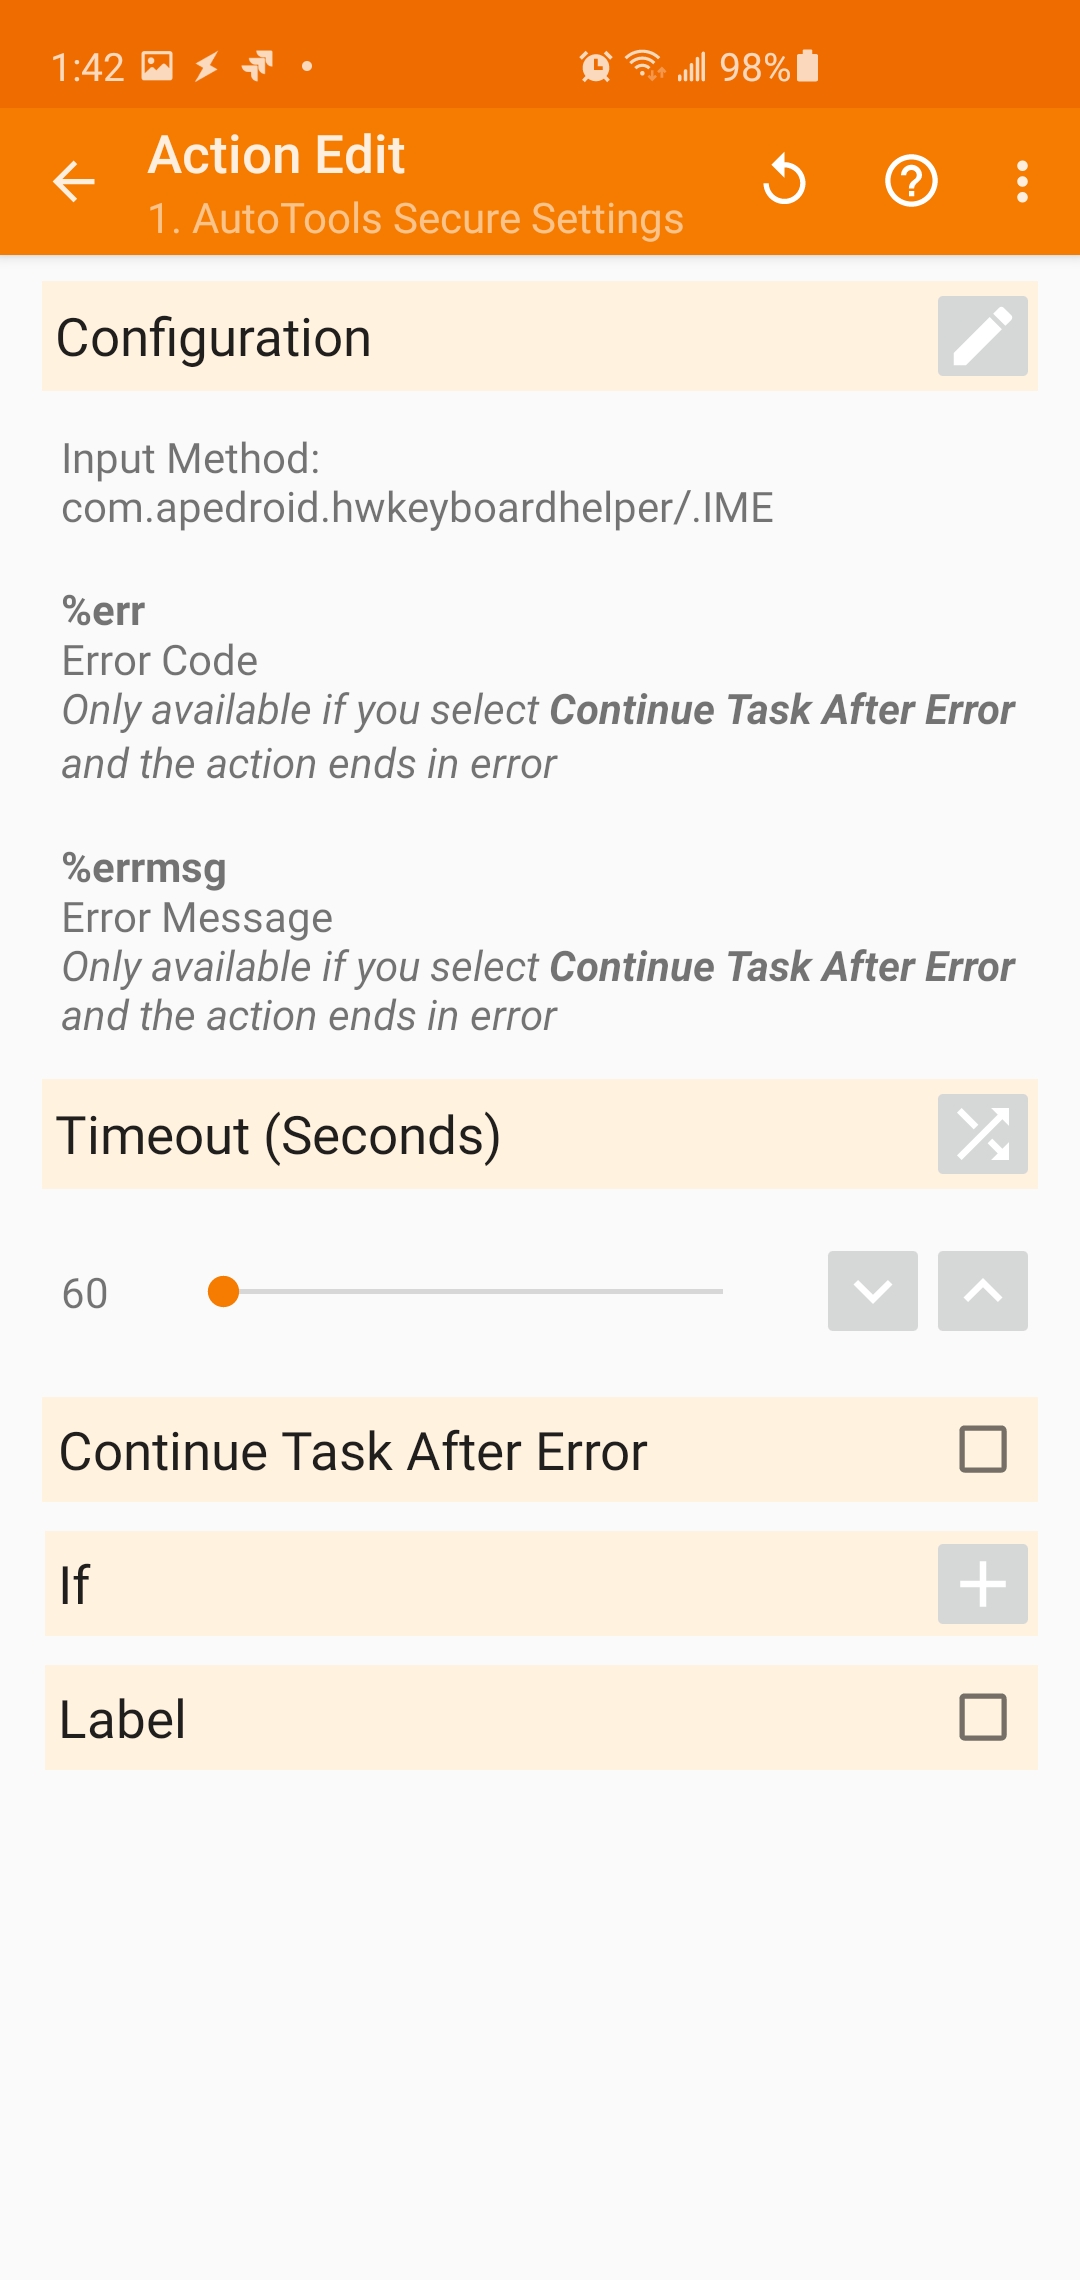 Journal: Using Tasker's Connection to Tackle Annoyances